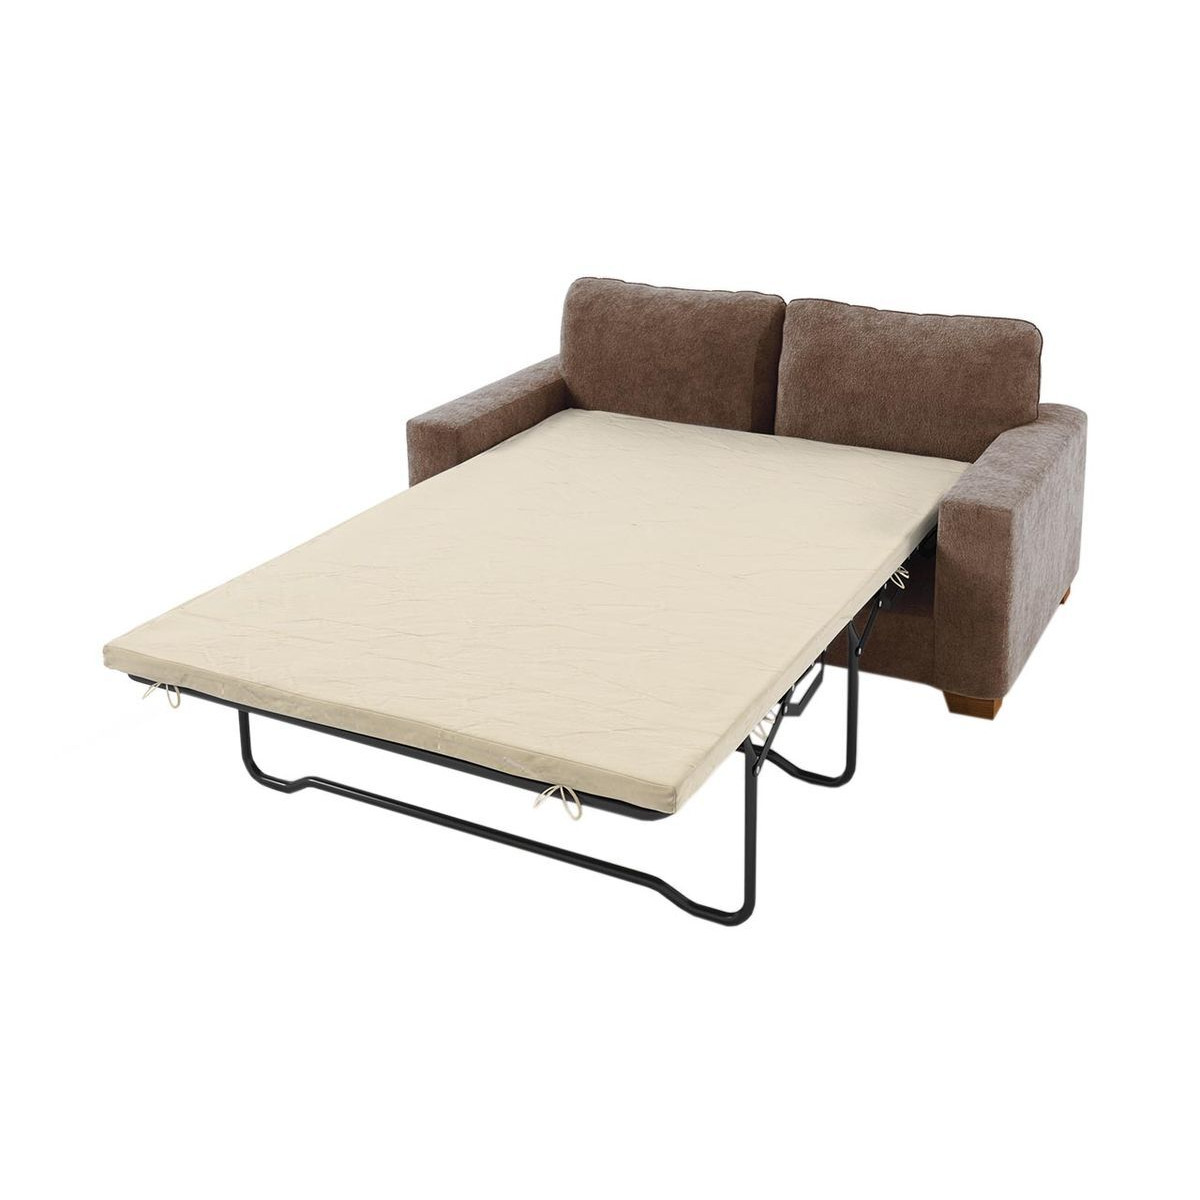 Comet 2 Seater Sofa Bed, light brown - image 1